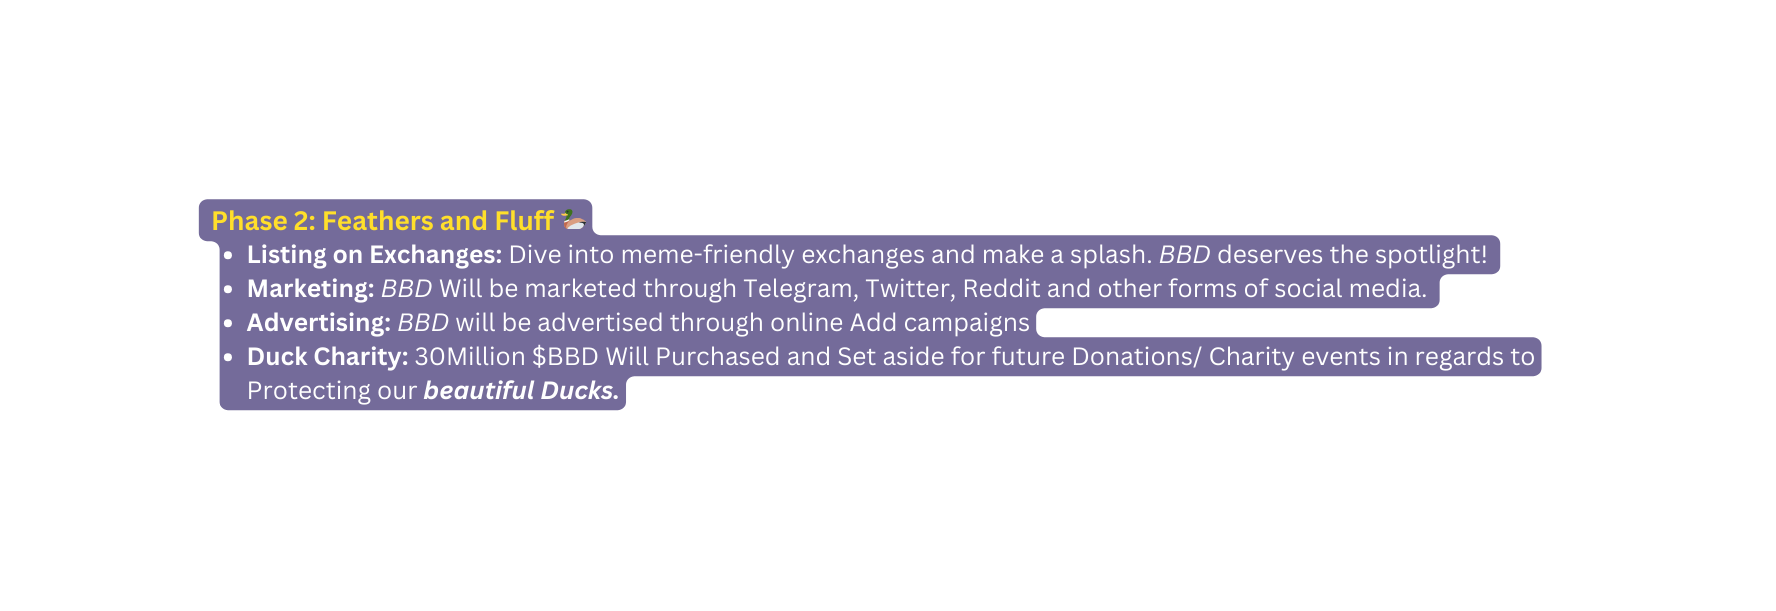 Phase 2 Feathers and Fluff Listing on Exchanges Dive into meme friendly exchanges and make a splash BBD deserves the spotlight Marketing BBD Will be marketed through Telegram Twitter Reddit and other forms of social media Advertising BBD will be advertised through online Add campaigns Duck Charity 30Million BBD Will Purchased and Set aside for future Donations Charity events in regards to Protecting our beautiful Ducks